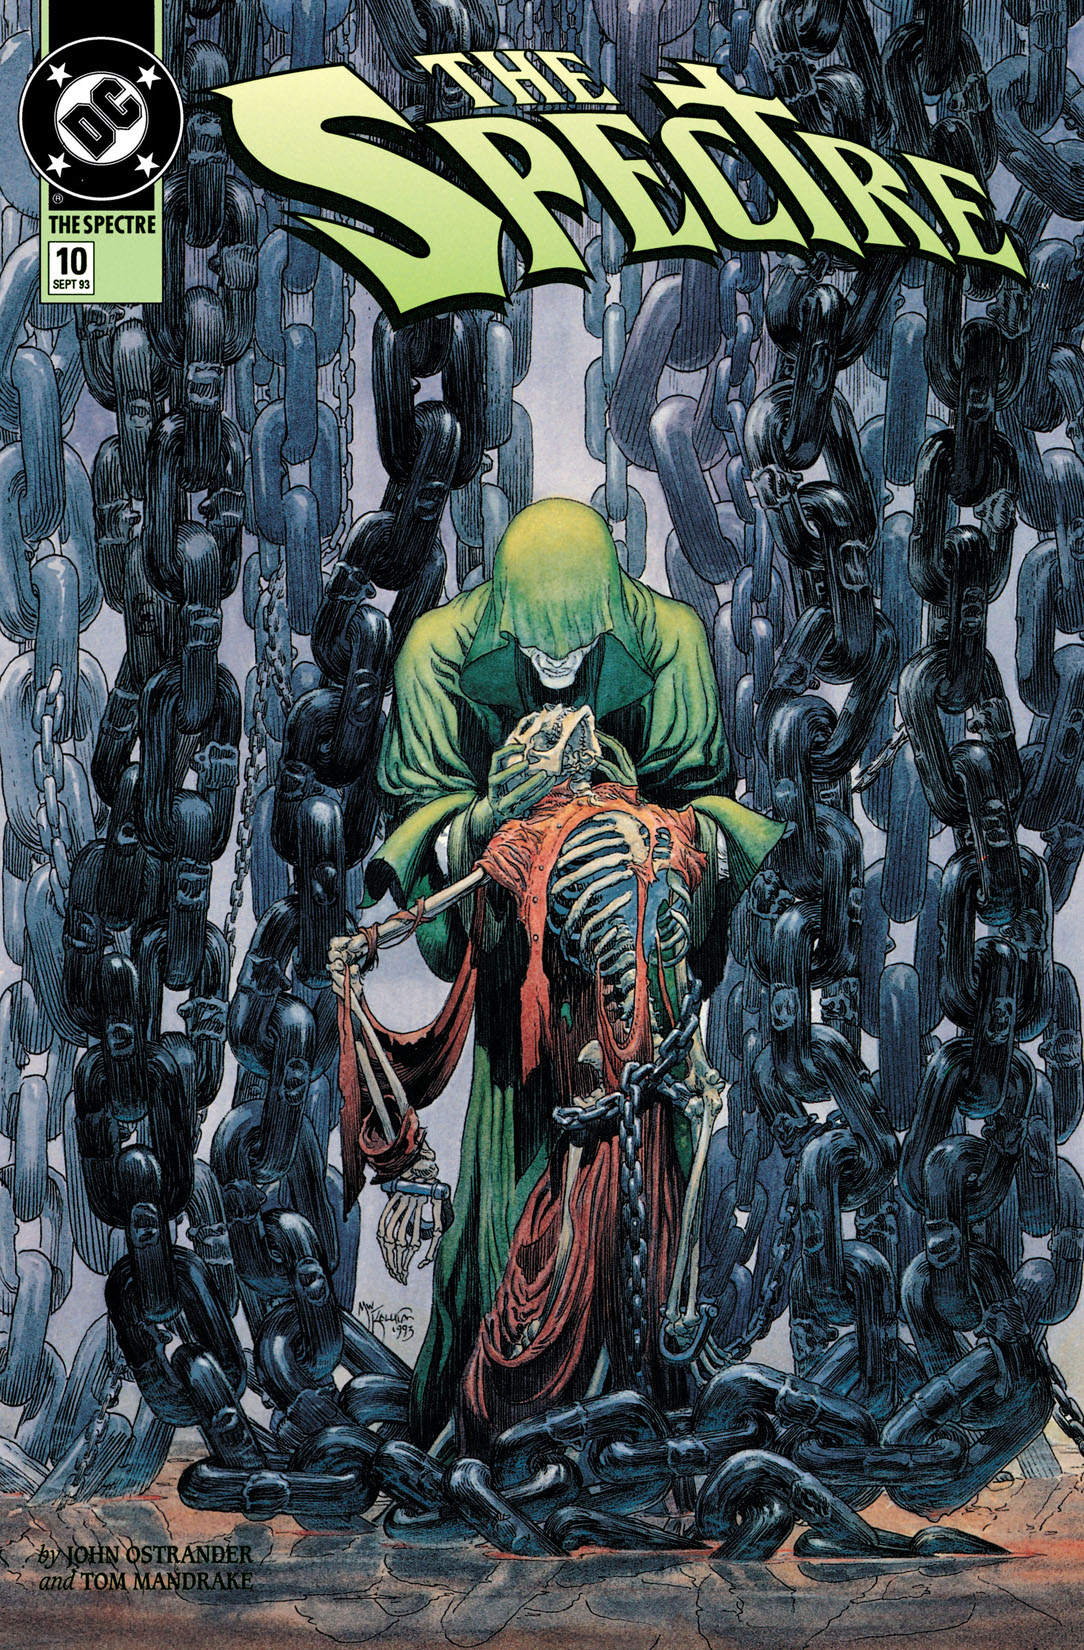 The Spectre (1992-) #10 preview images